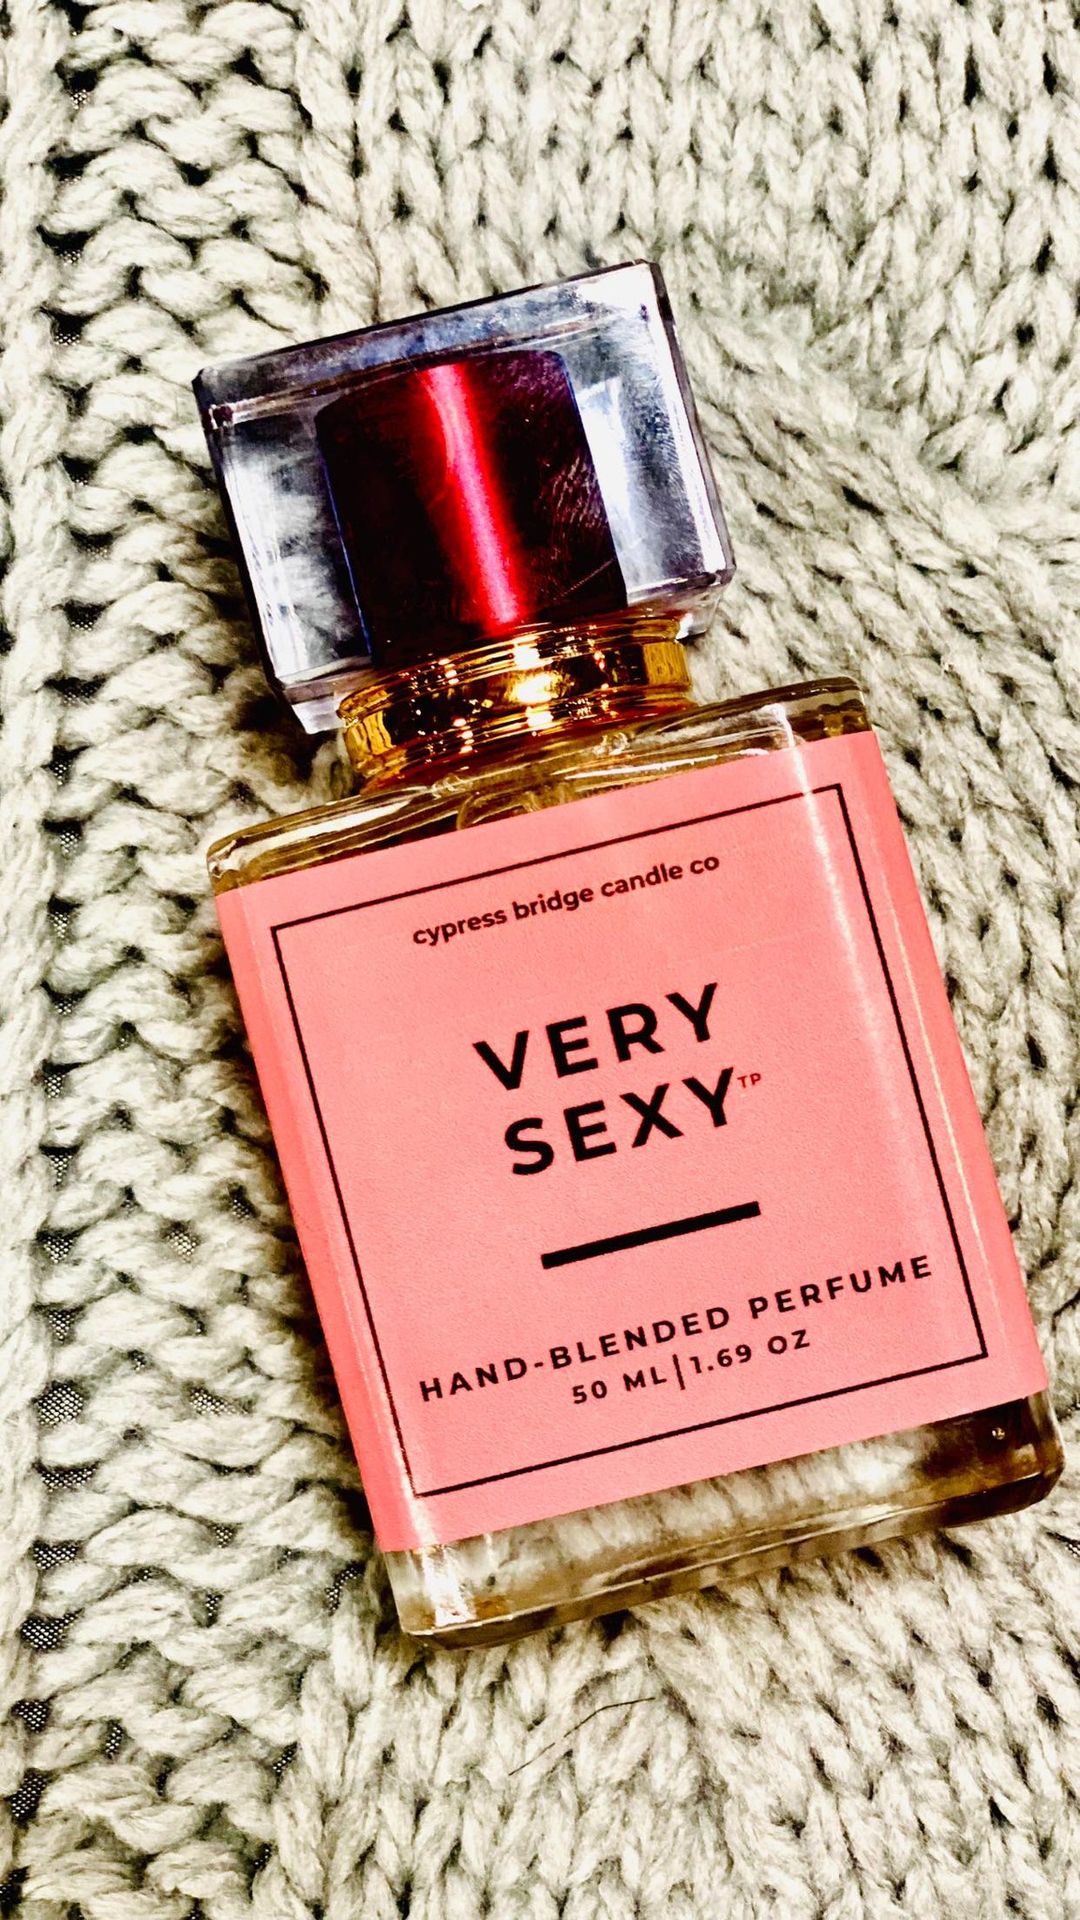 HAND BLENDED PERFUMES